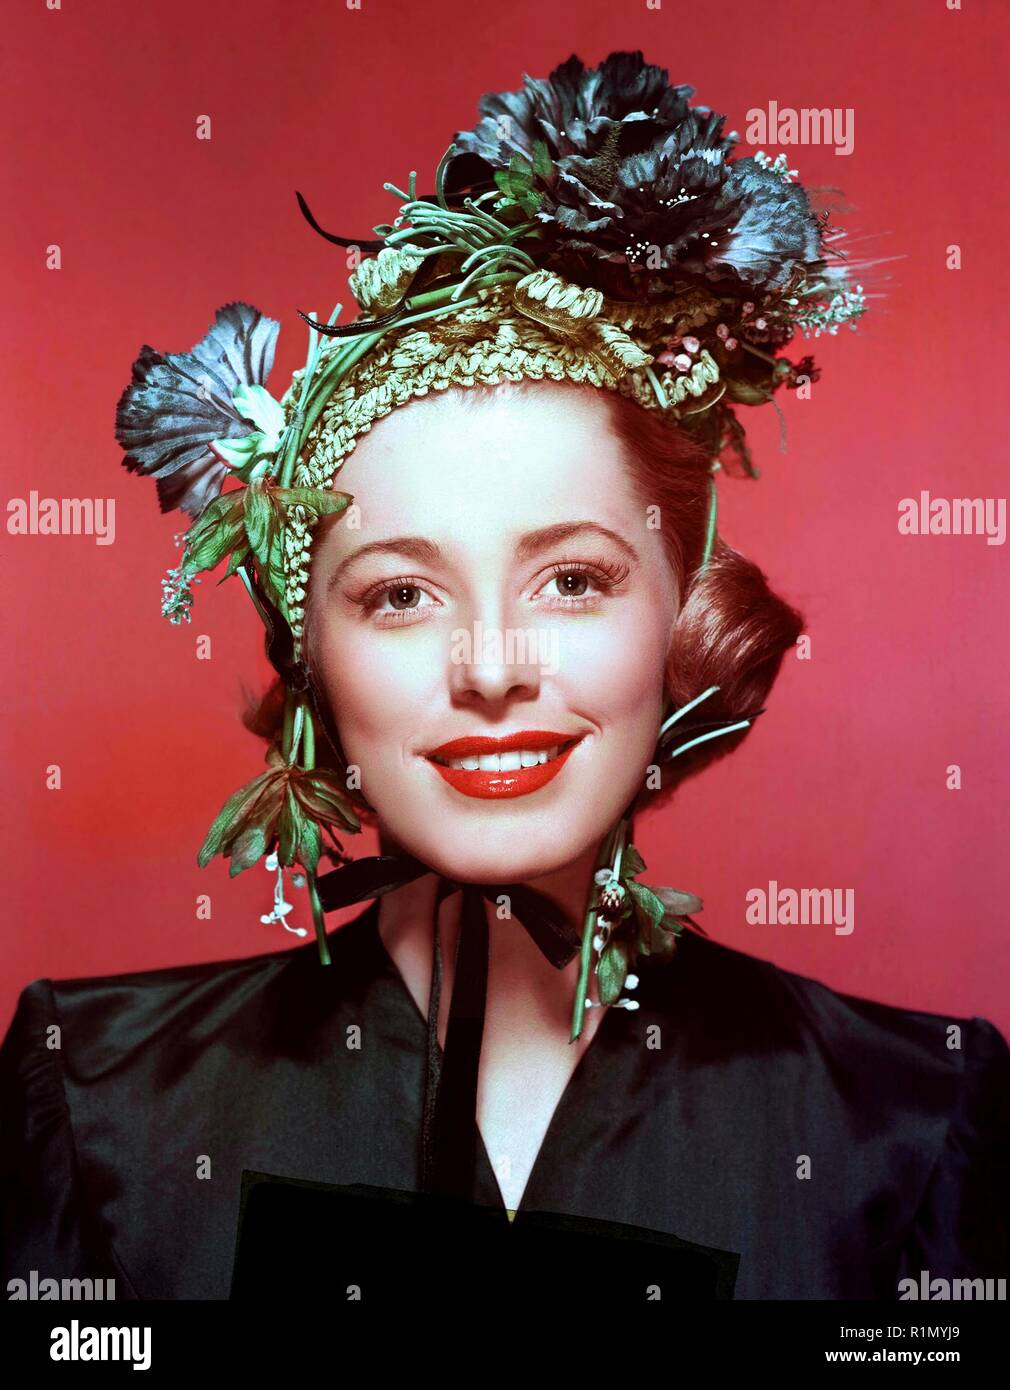 Eleanor Jean Parker (June 26, 1922 – December 9, 2013) was an American actress who appeared in some 80 movies and television series. An actress of notable versatility, she was called Woman of a Thousand Faces by Doug McClelland, author of a biography of Parker by the same title.[citation needed]  At age 18, Parker was signed by Warner Brothers in 1941. She was nominated three times for the Academy Award for Best Actress in the 1950s, for Caged (1950), Detective Story (1951) and Interrupted Melody (1955).Her role in Caged also won her the Volpi Cup for Best Actress at the Venice Film Festival O Stock Photo